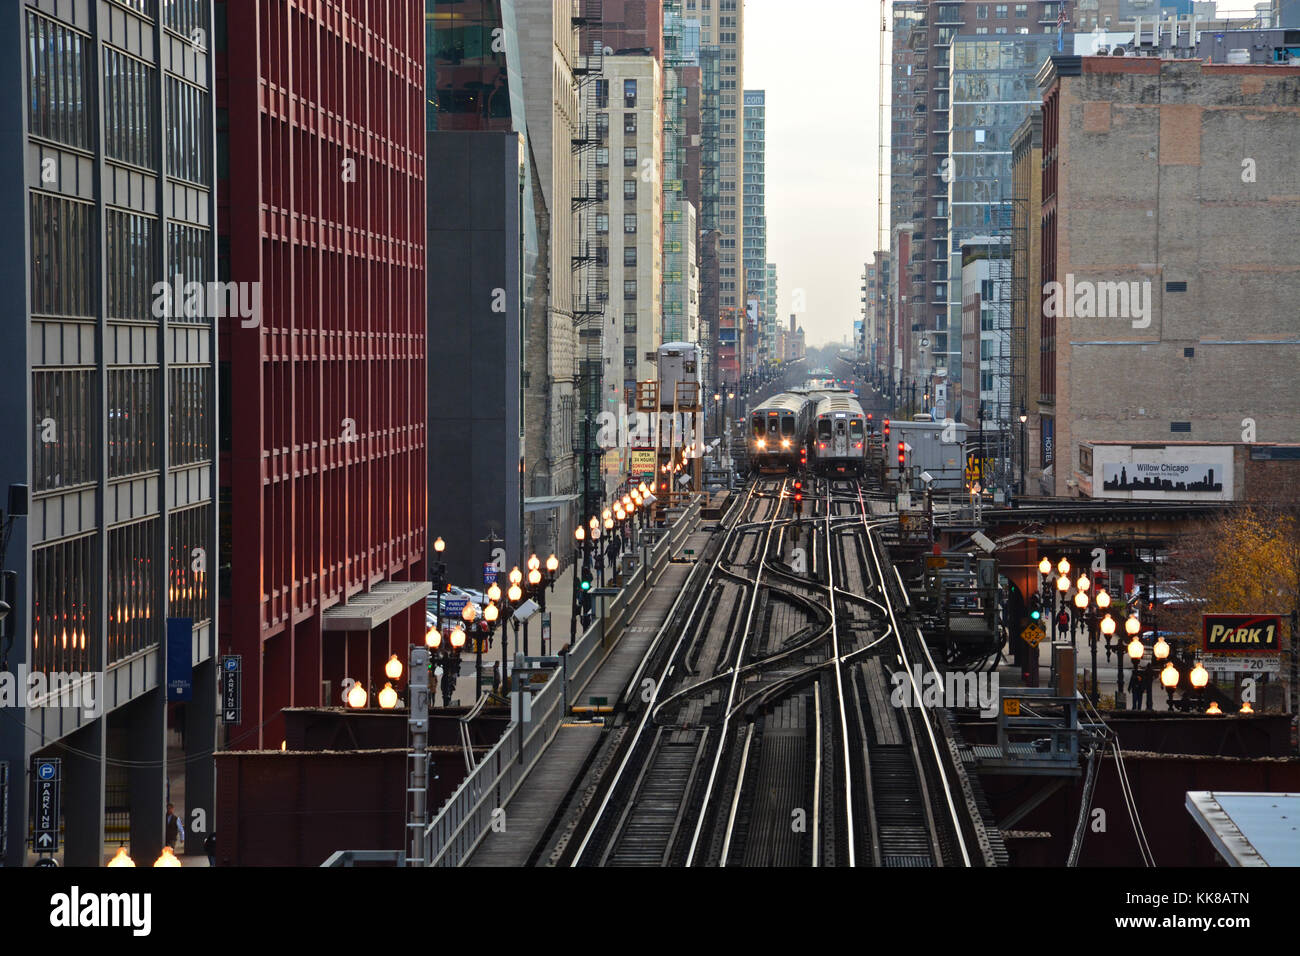 Trains pass on the elevated tracks over Wabash Avenue in Chicago's downtown Loop. Stock Photo